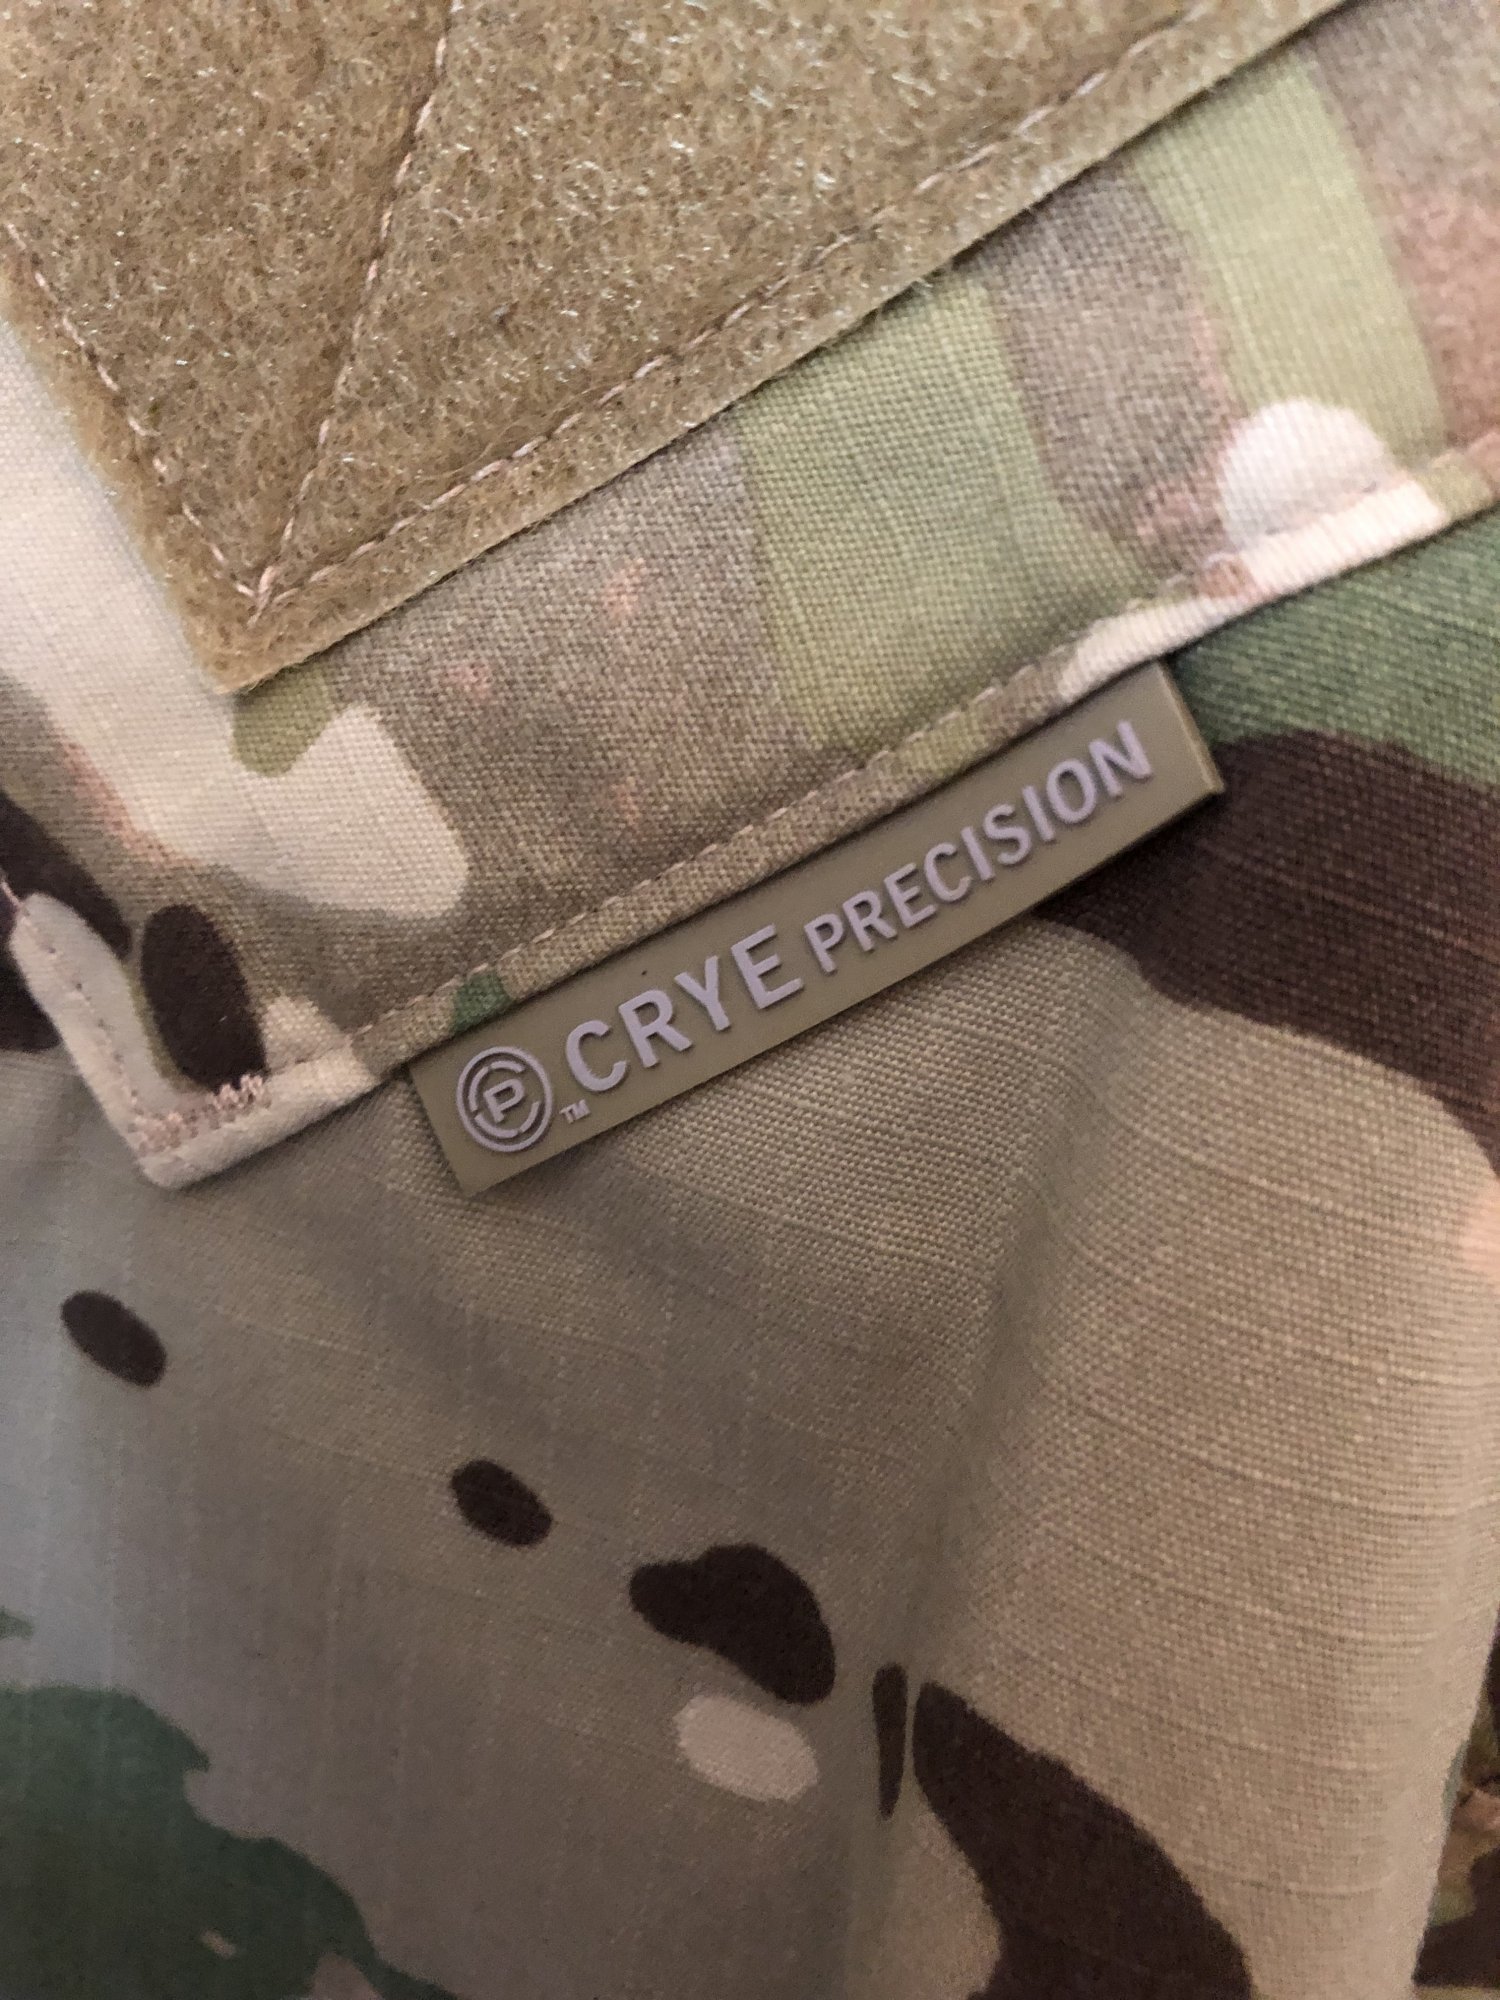 Crye Precision shirt - Gear - Airsoft Forums UK